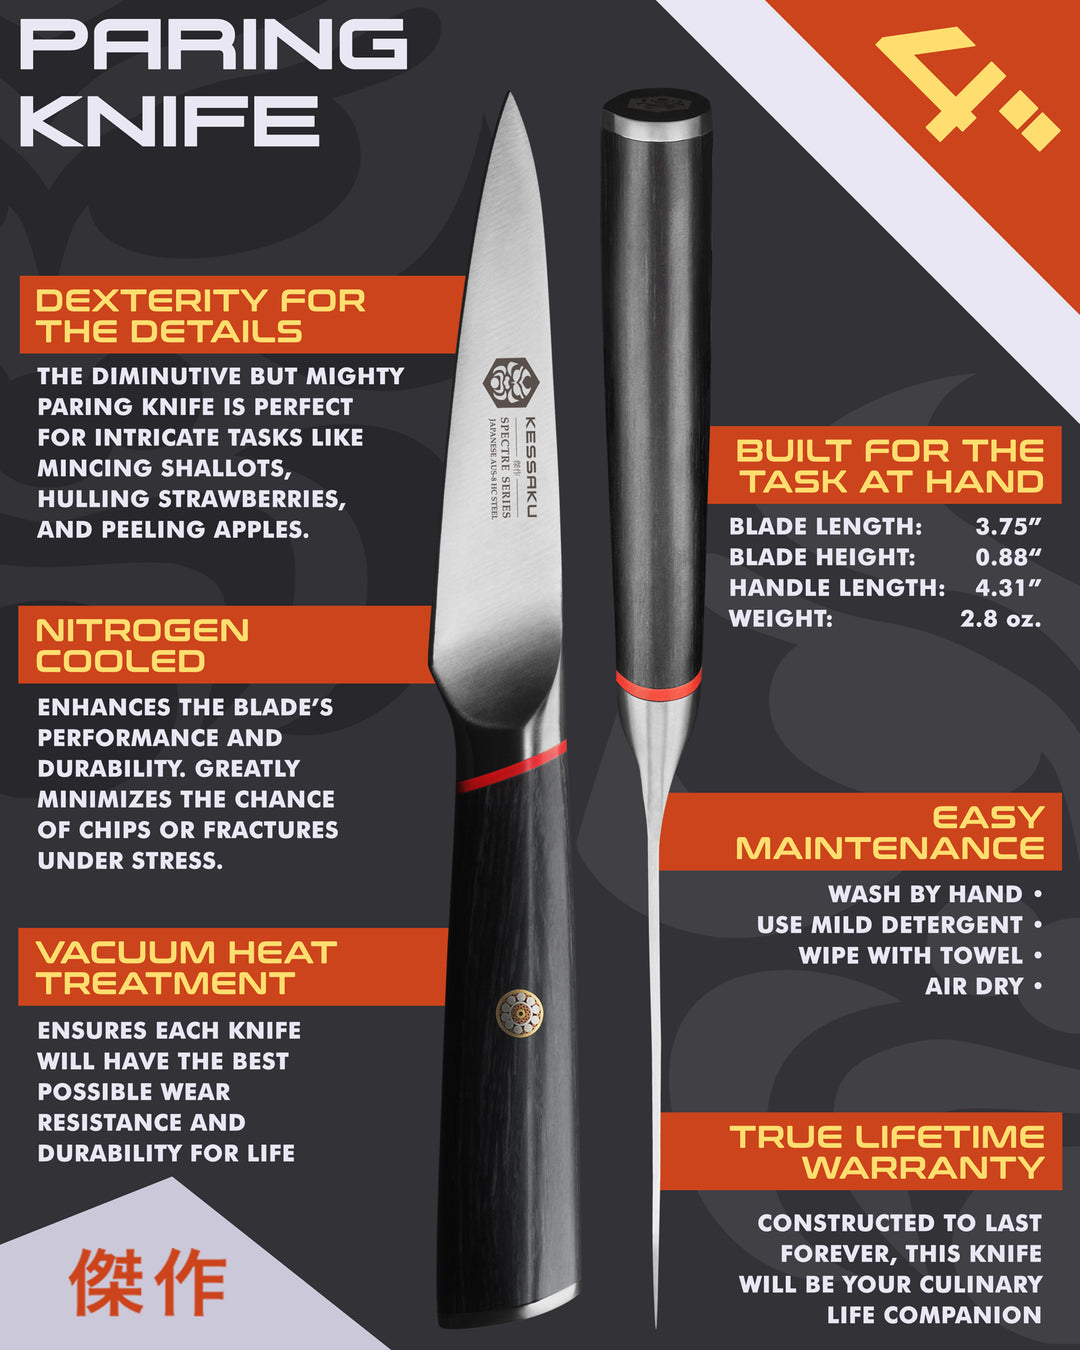 Kessaku Spectre Paring Knife uses, dimensions, maintenance, warranty info, and additional blade treatments